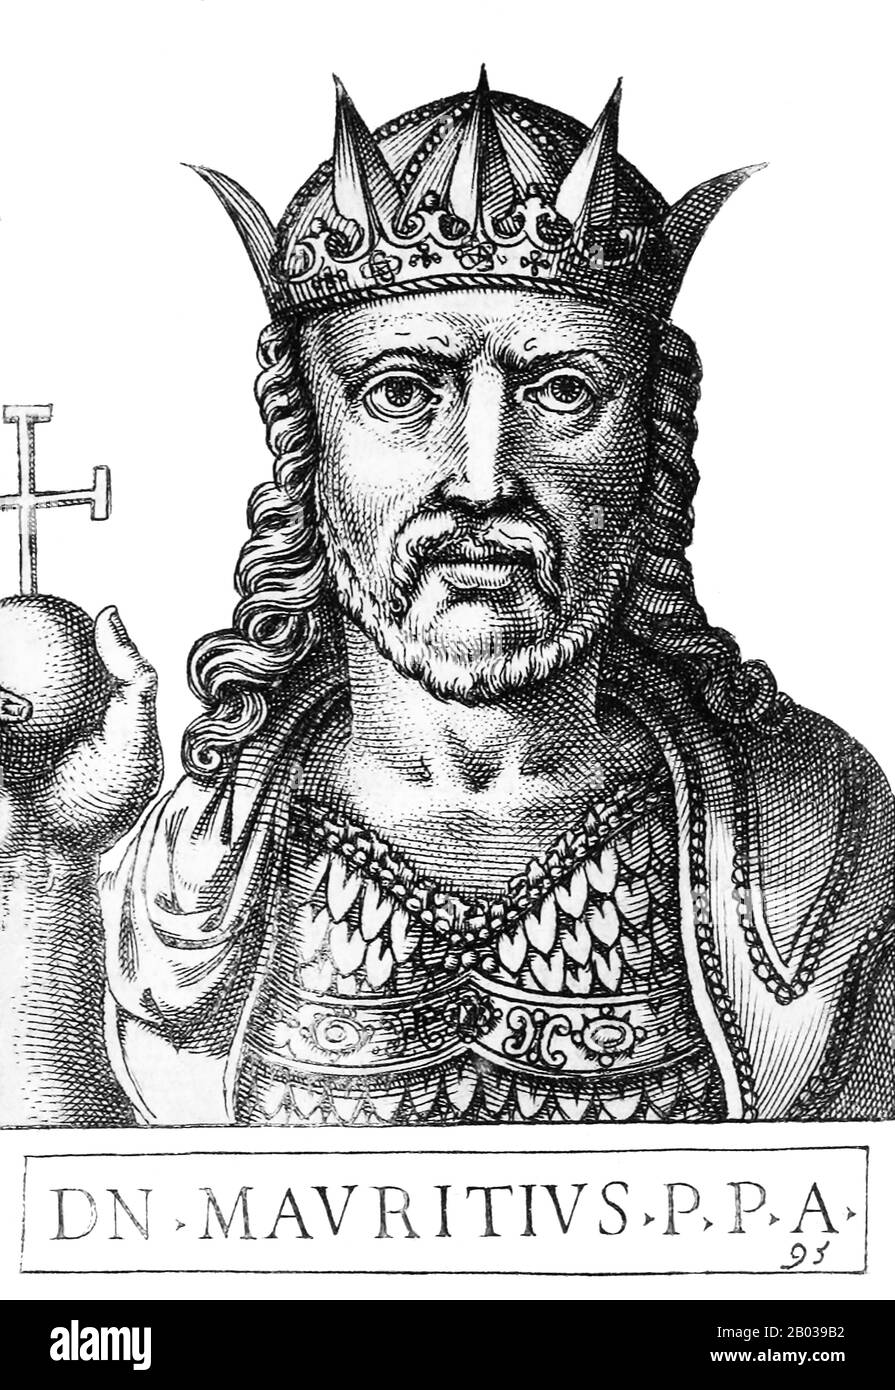 Maurice (539-602) was born in Cappadocia and quickly rose to become a prominent general in his youth, with numerous successes under his belt from campaigning against the Sassanid Empire. He married Constantina, Emperor Tiberius II's daughter, and succeeded his father-in-law as emperor in 582, inheriting a tumultuous situation of numerous warring fronts and high tributes to Avar barbarians.  Maurice quickly brought the war against the Sassanids to a victorious conclusion and vastly expanded the Byzantine Empire's eastern border in the Caucasus. He pushed the Avars back across the Danube River i Stock Photo